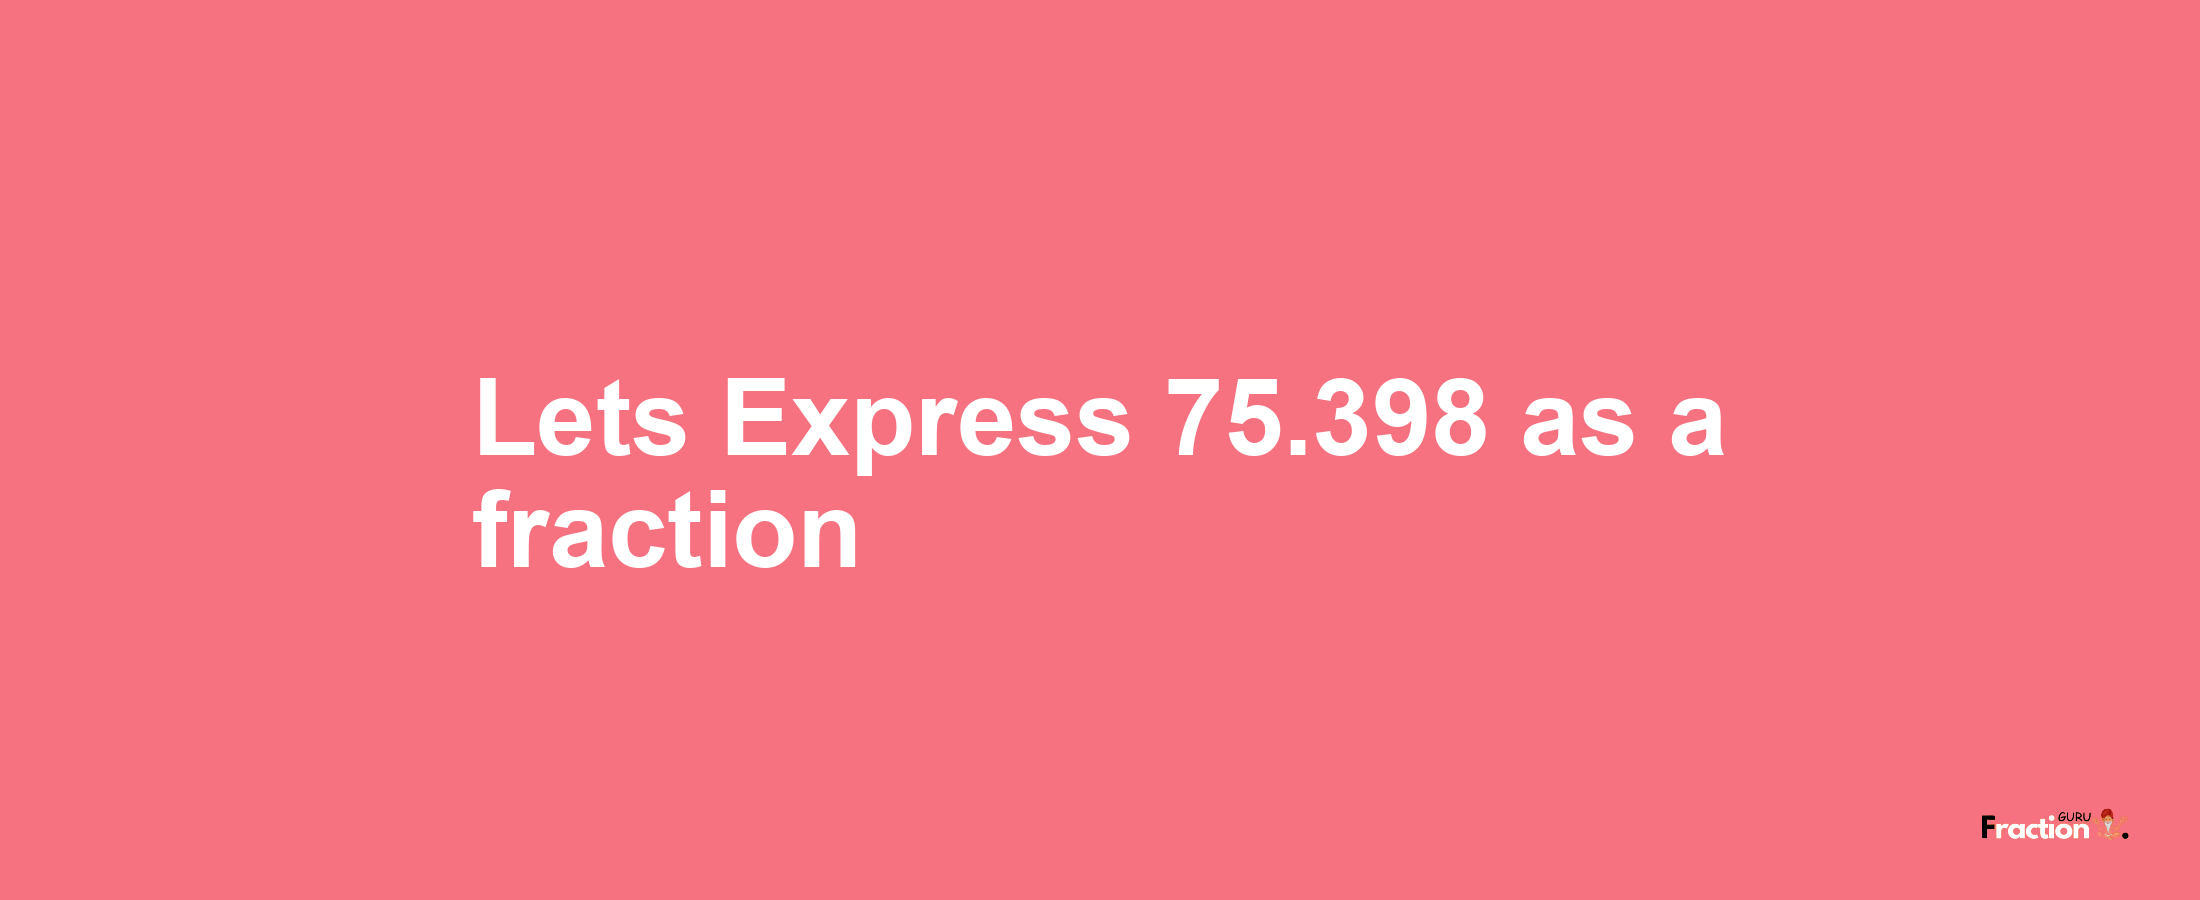 Lets Express 75.398 as afraction